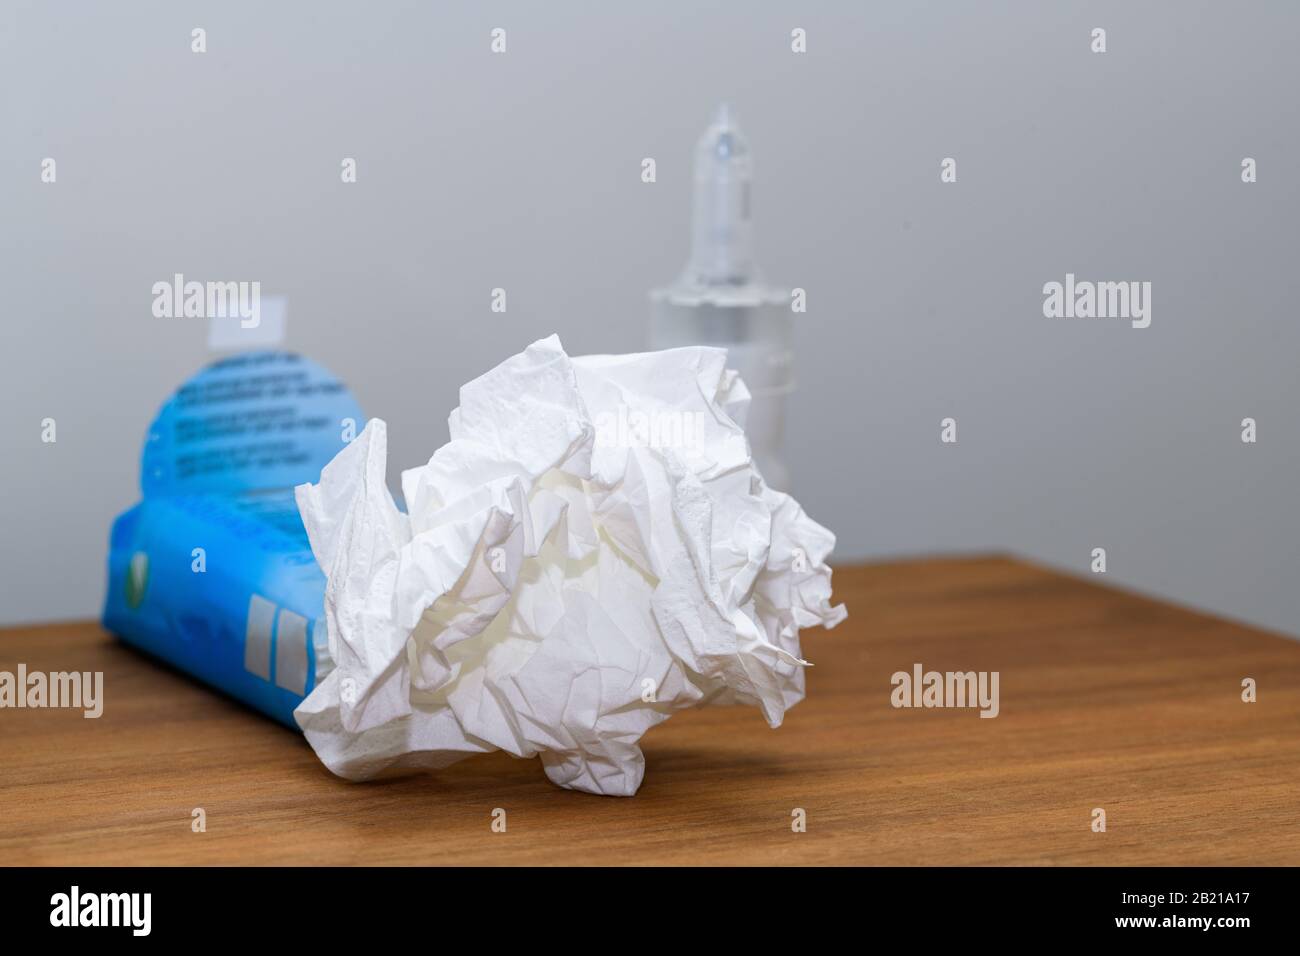 Paper tissue and nasal spray on a nightstand used during cold, flu or virus. Concept for medical conditions indoors at home. Stock Photo